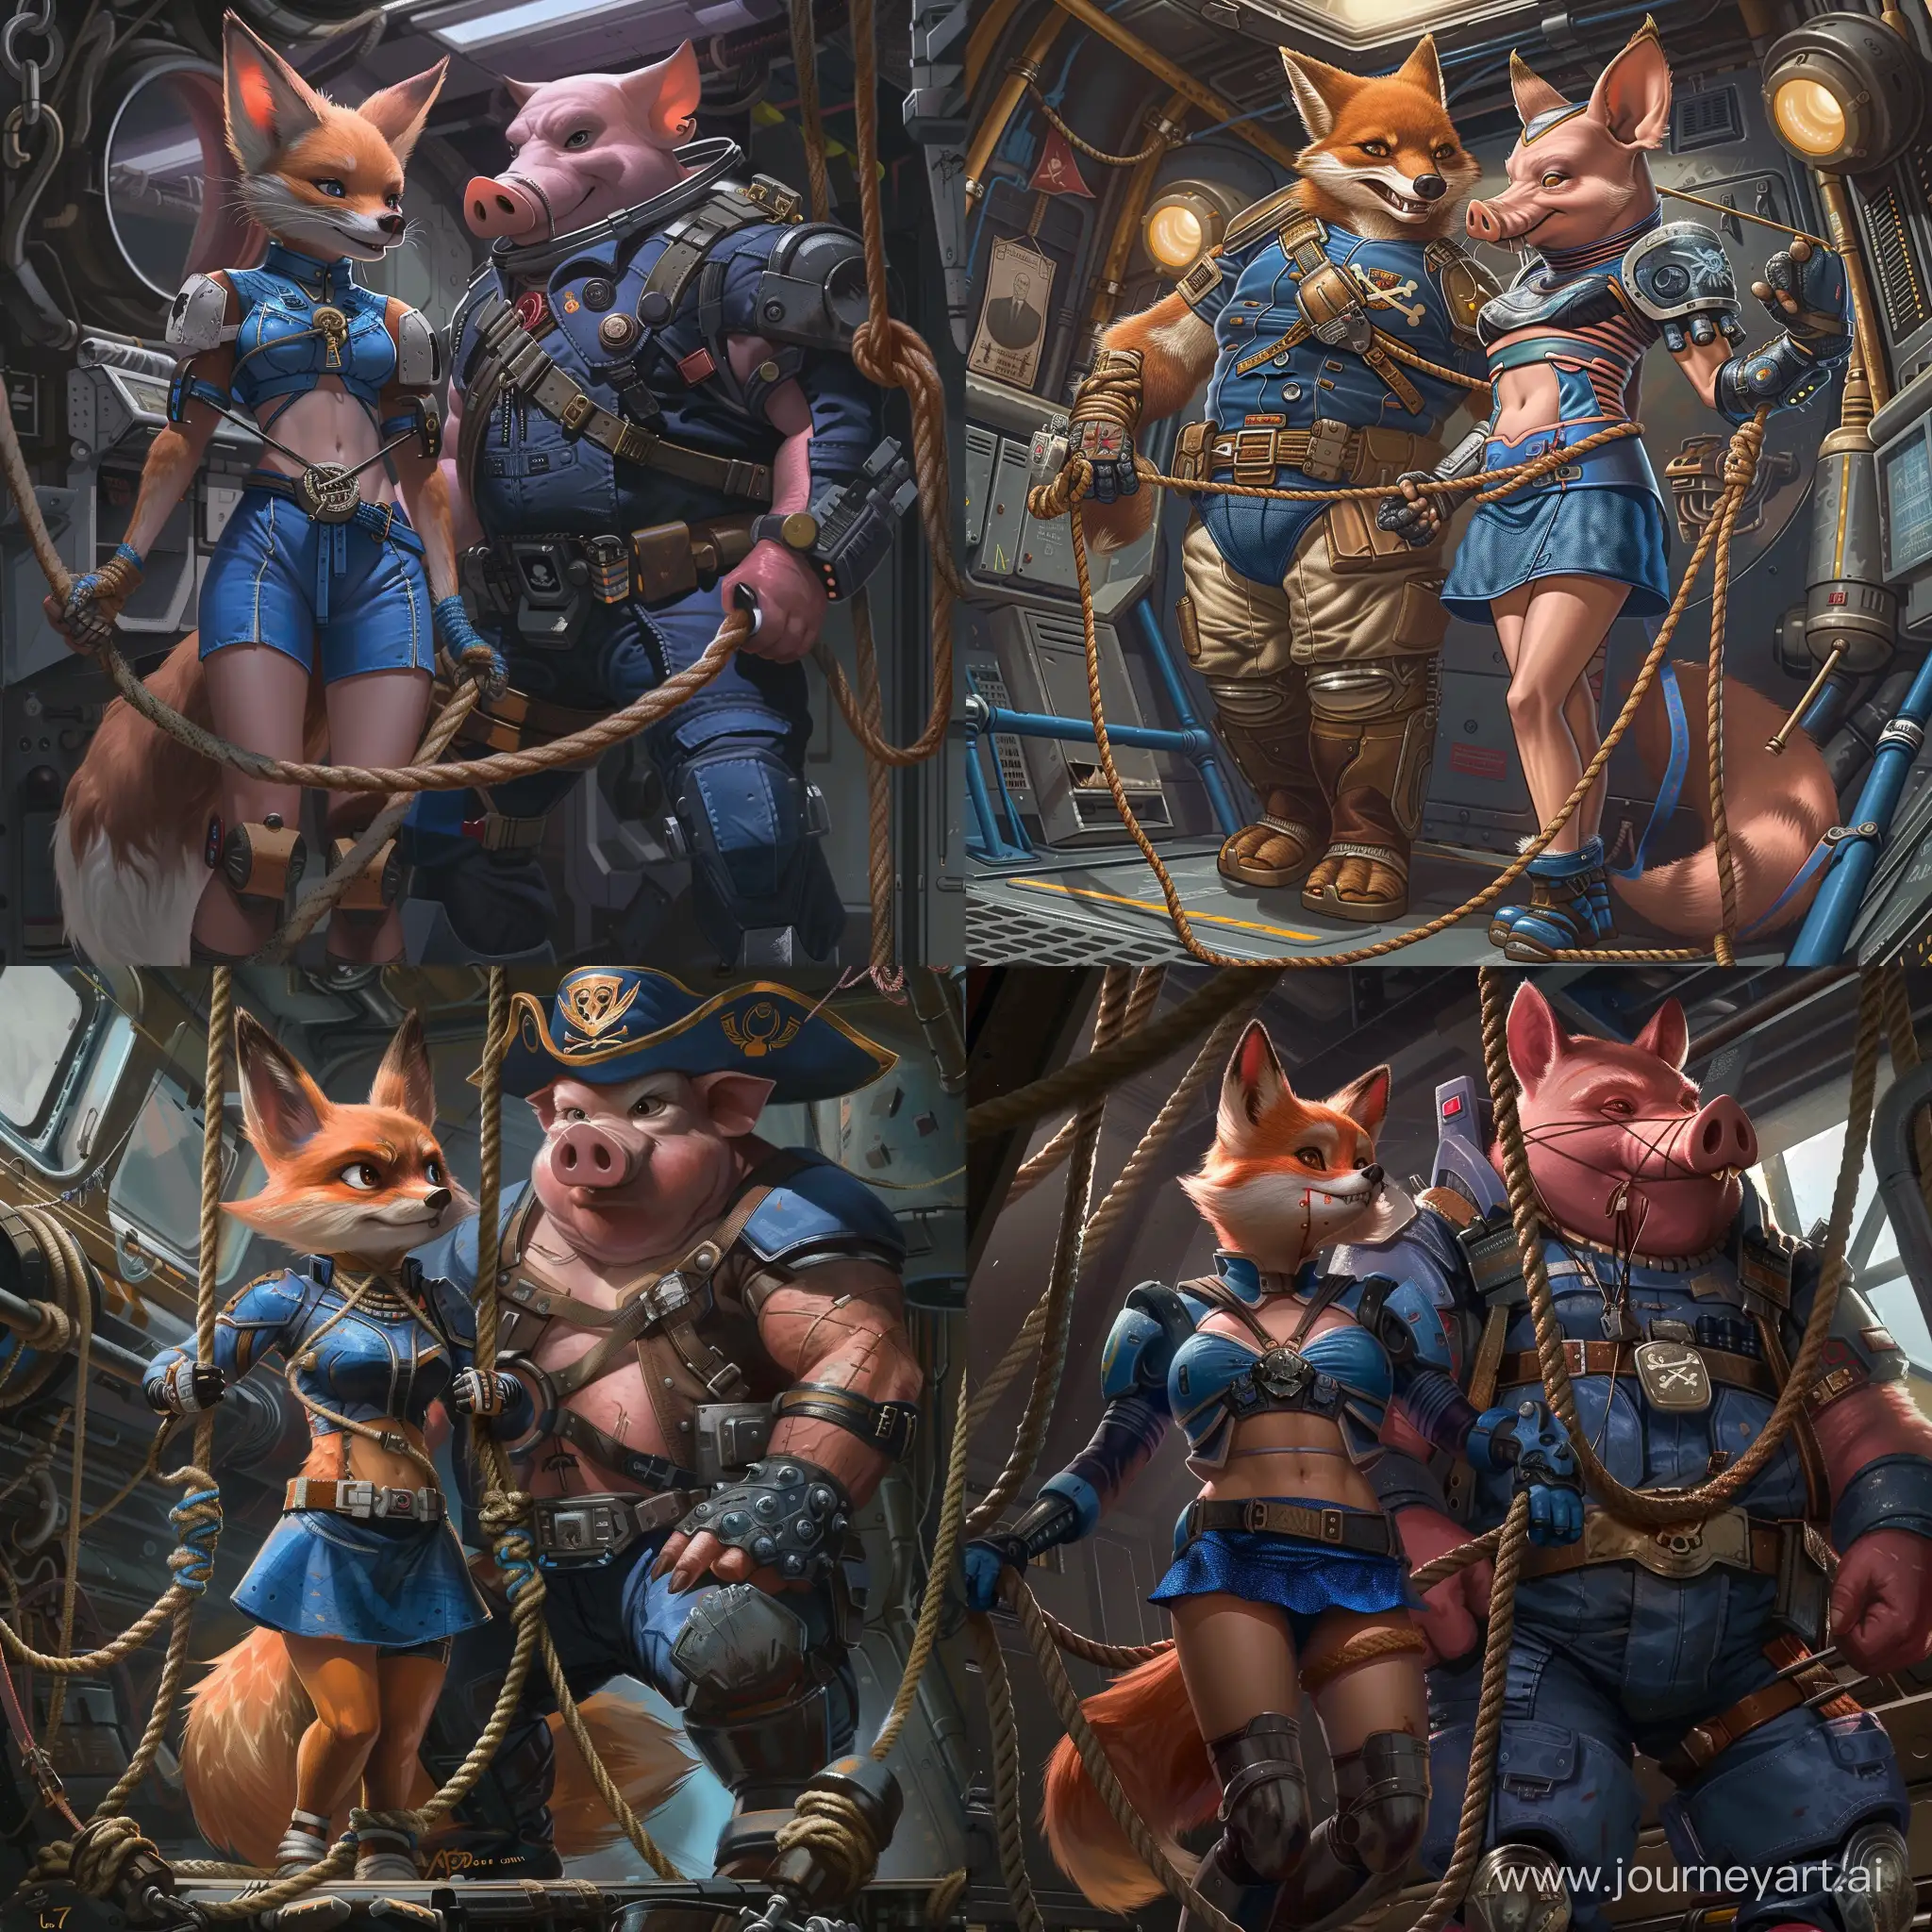 Imagine cute humanoid fox female, in futuristic blue suit, consist off short blue skirt and blue armor jacket, being tied up with rope, and a big humanoid pigman space pirate captain next to her, aboard a space ship